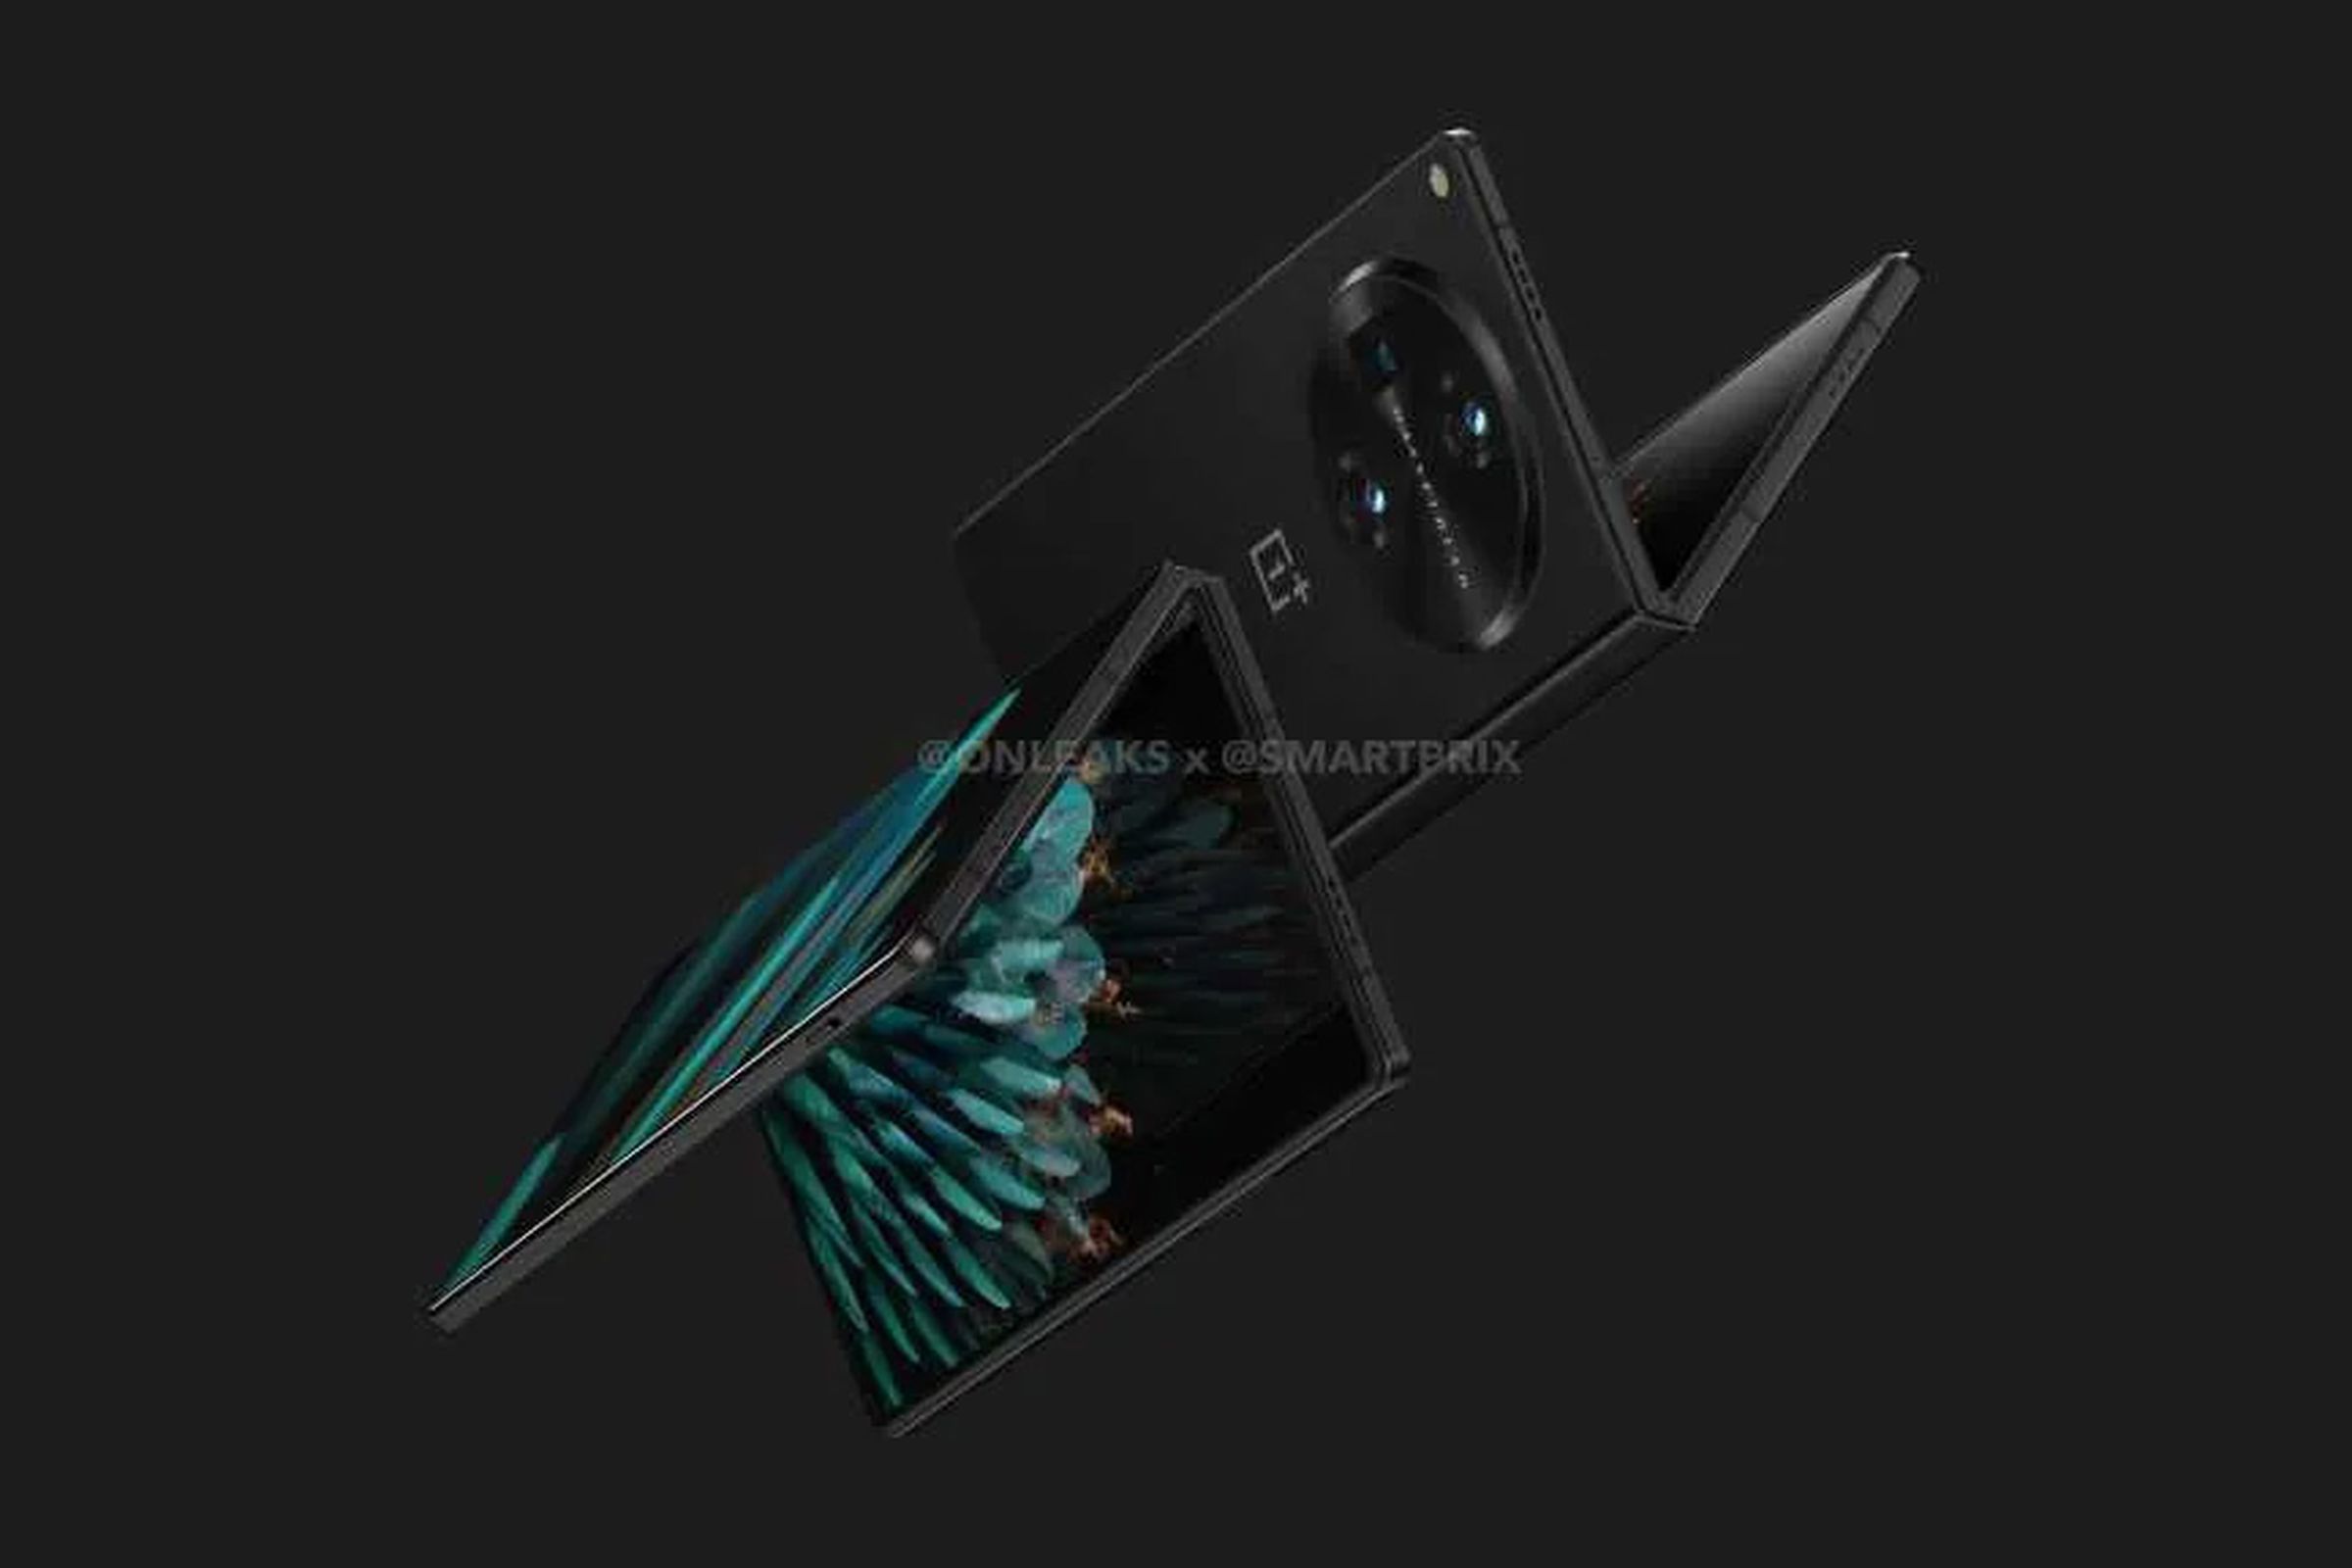 An unofficial render of the upcoming OnePlus foldable.